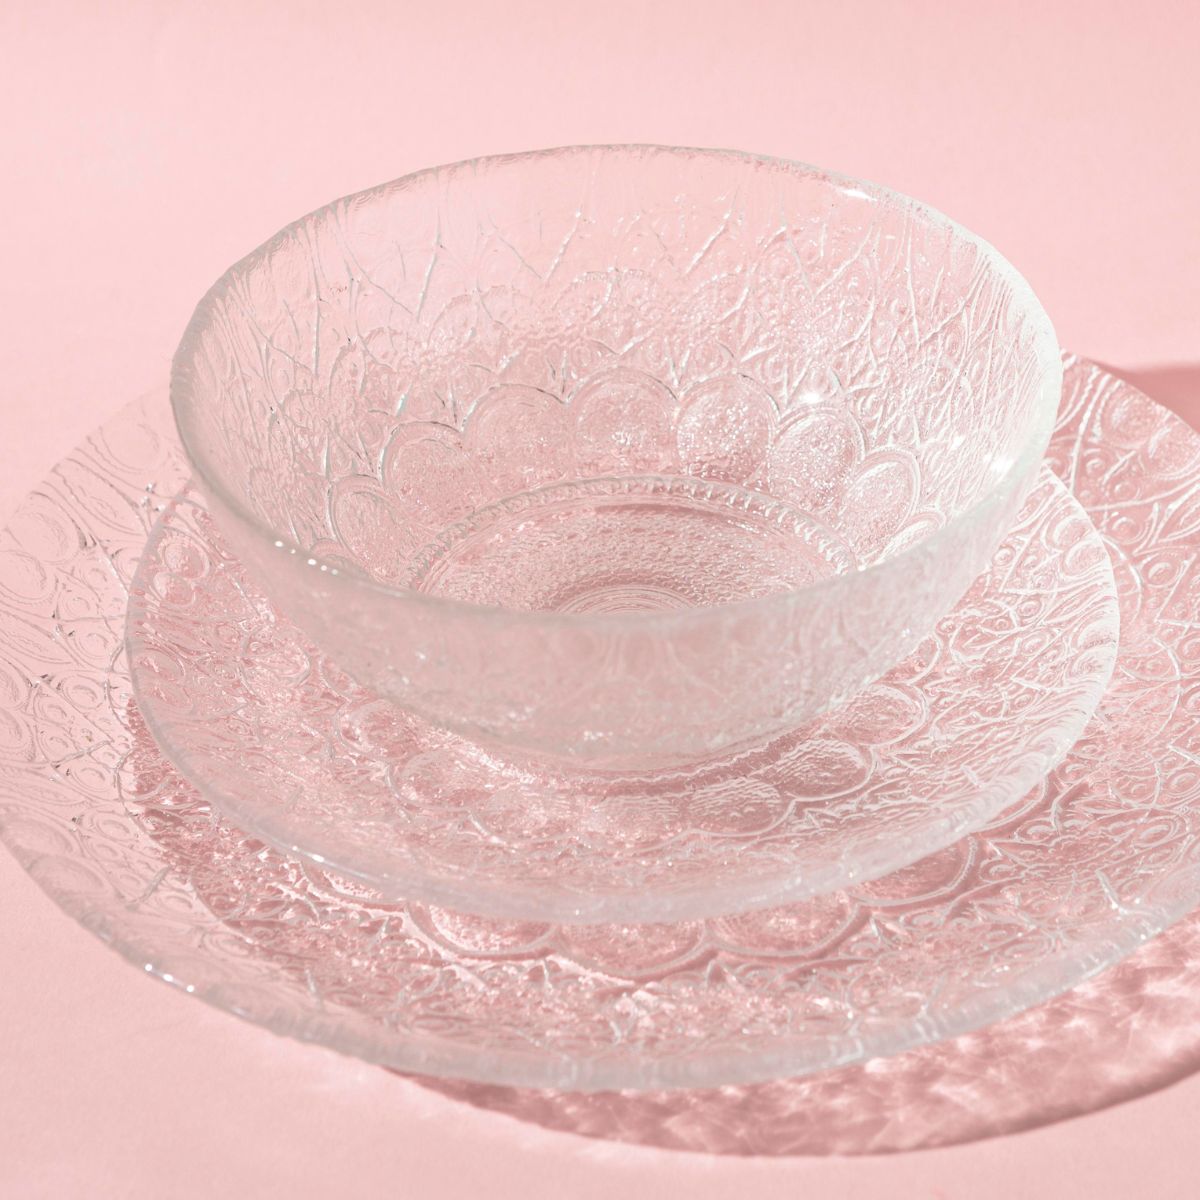 Glass dish set sitting on a pink tablecloth.